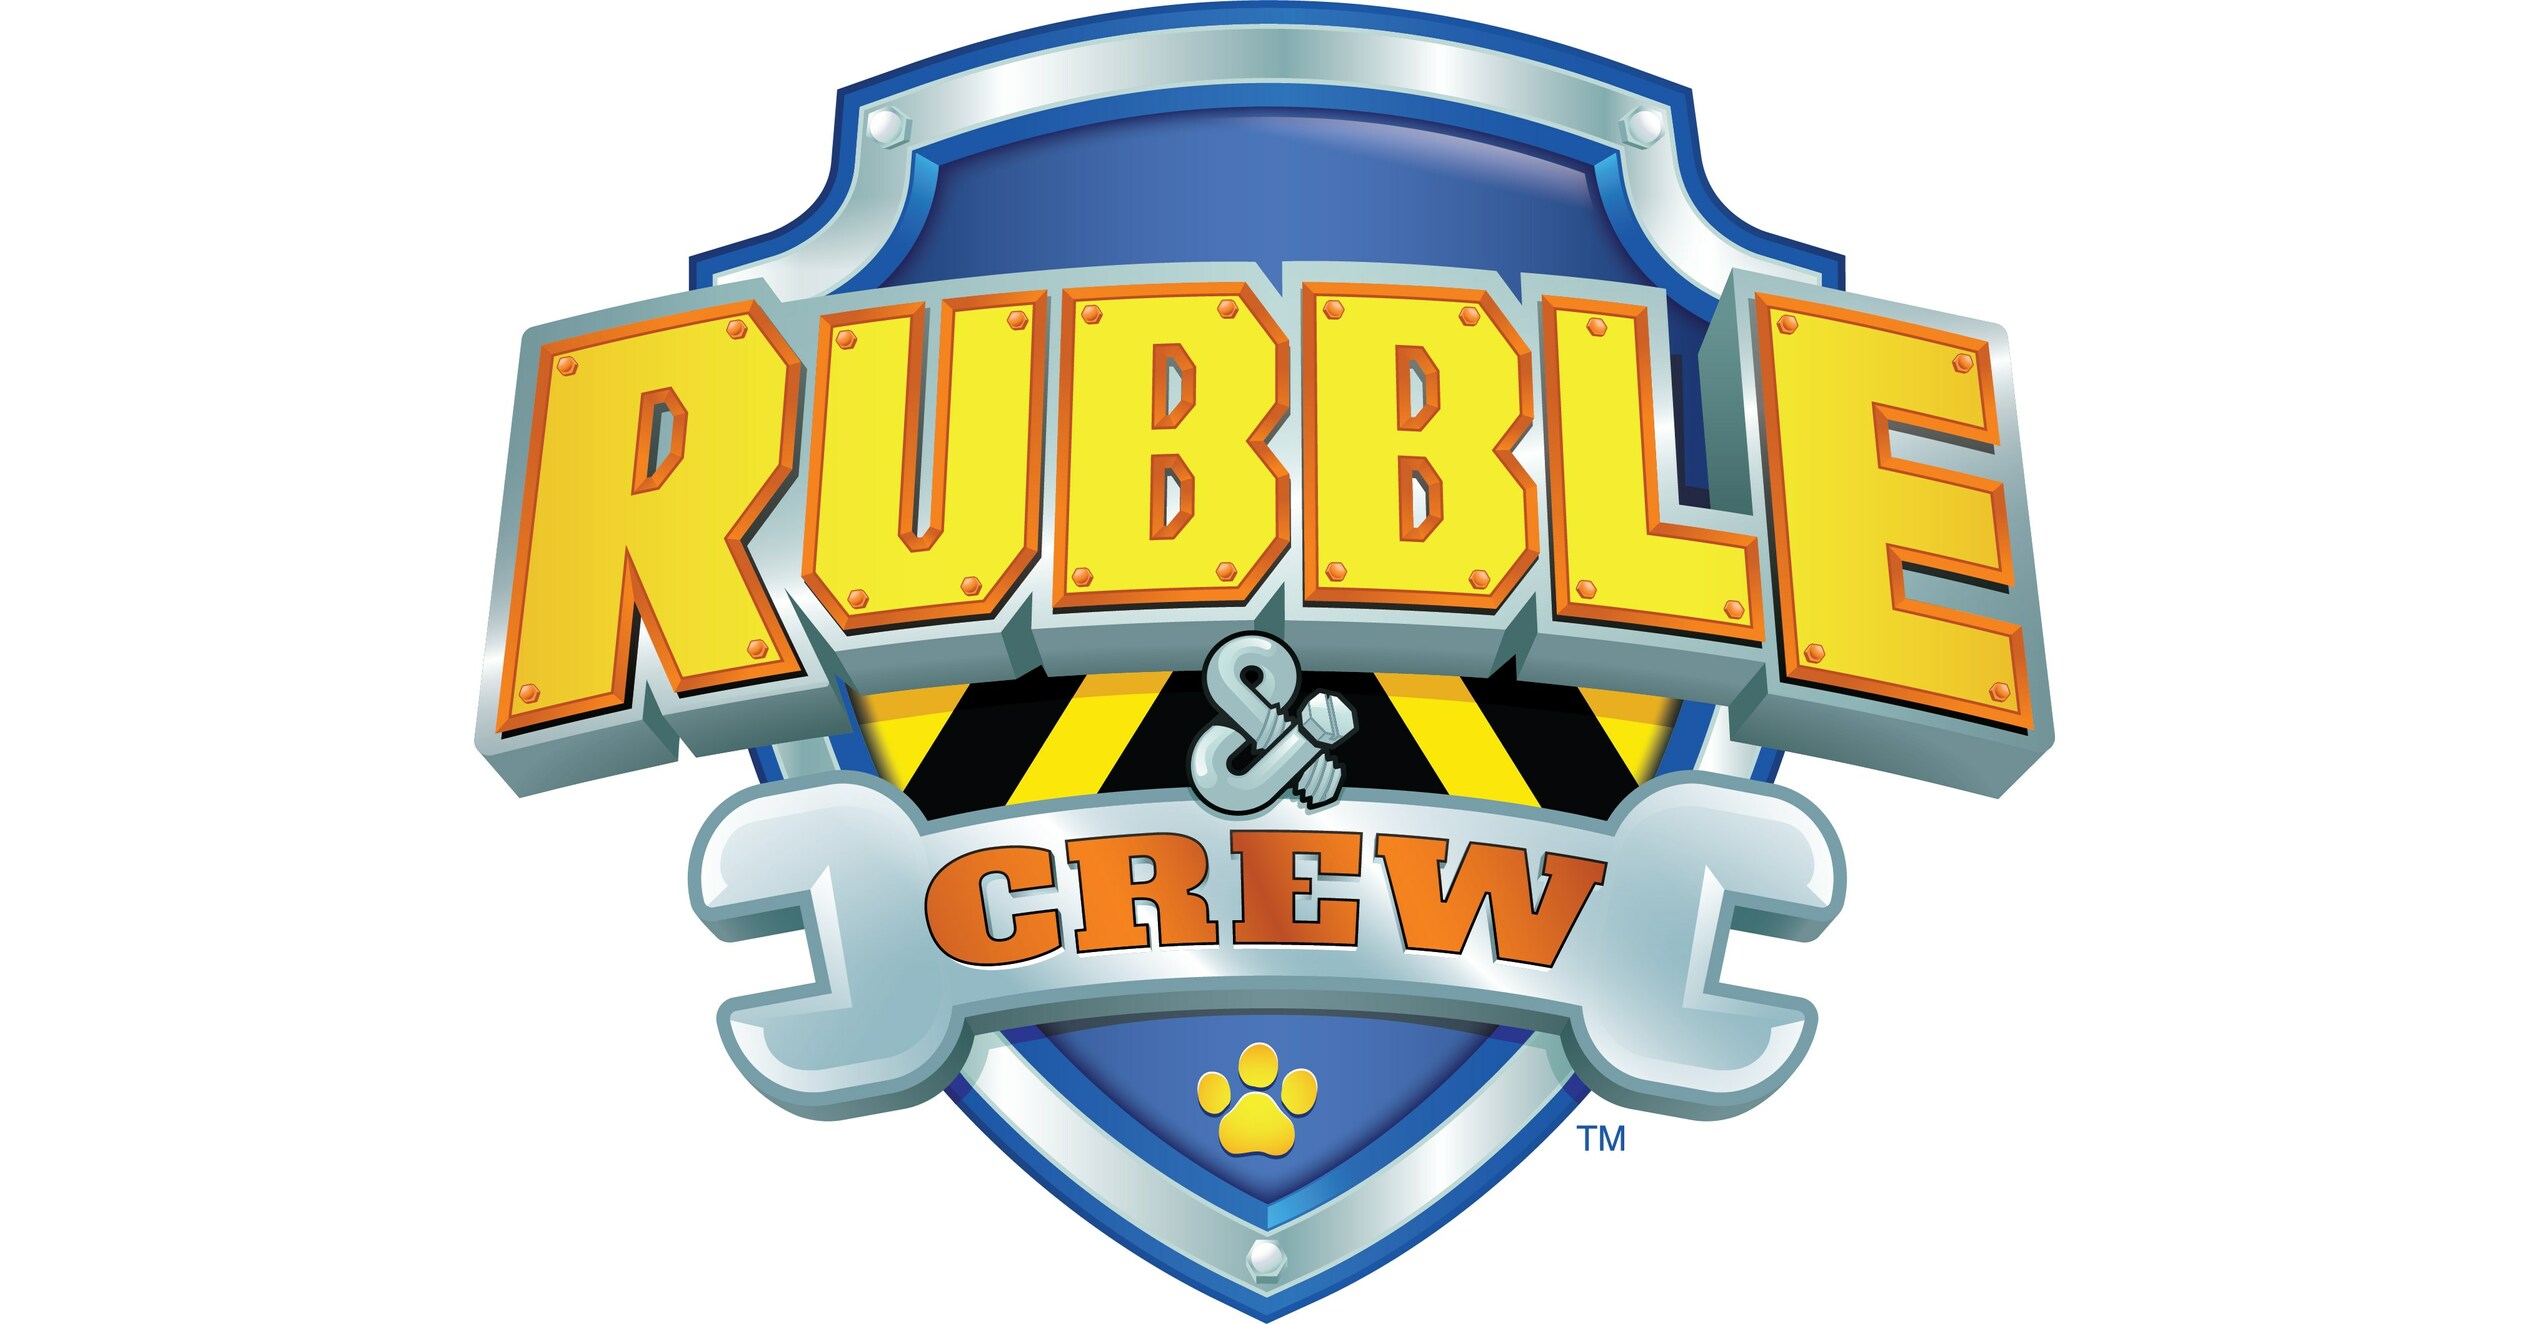 Paw Patrol Team on 10 Year Anniversary and Rubble & Crew Spin-Off